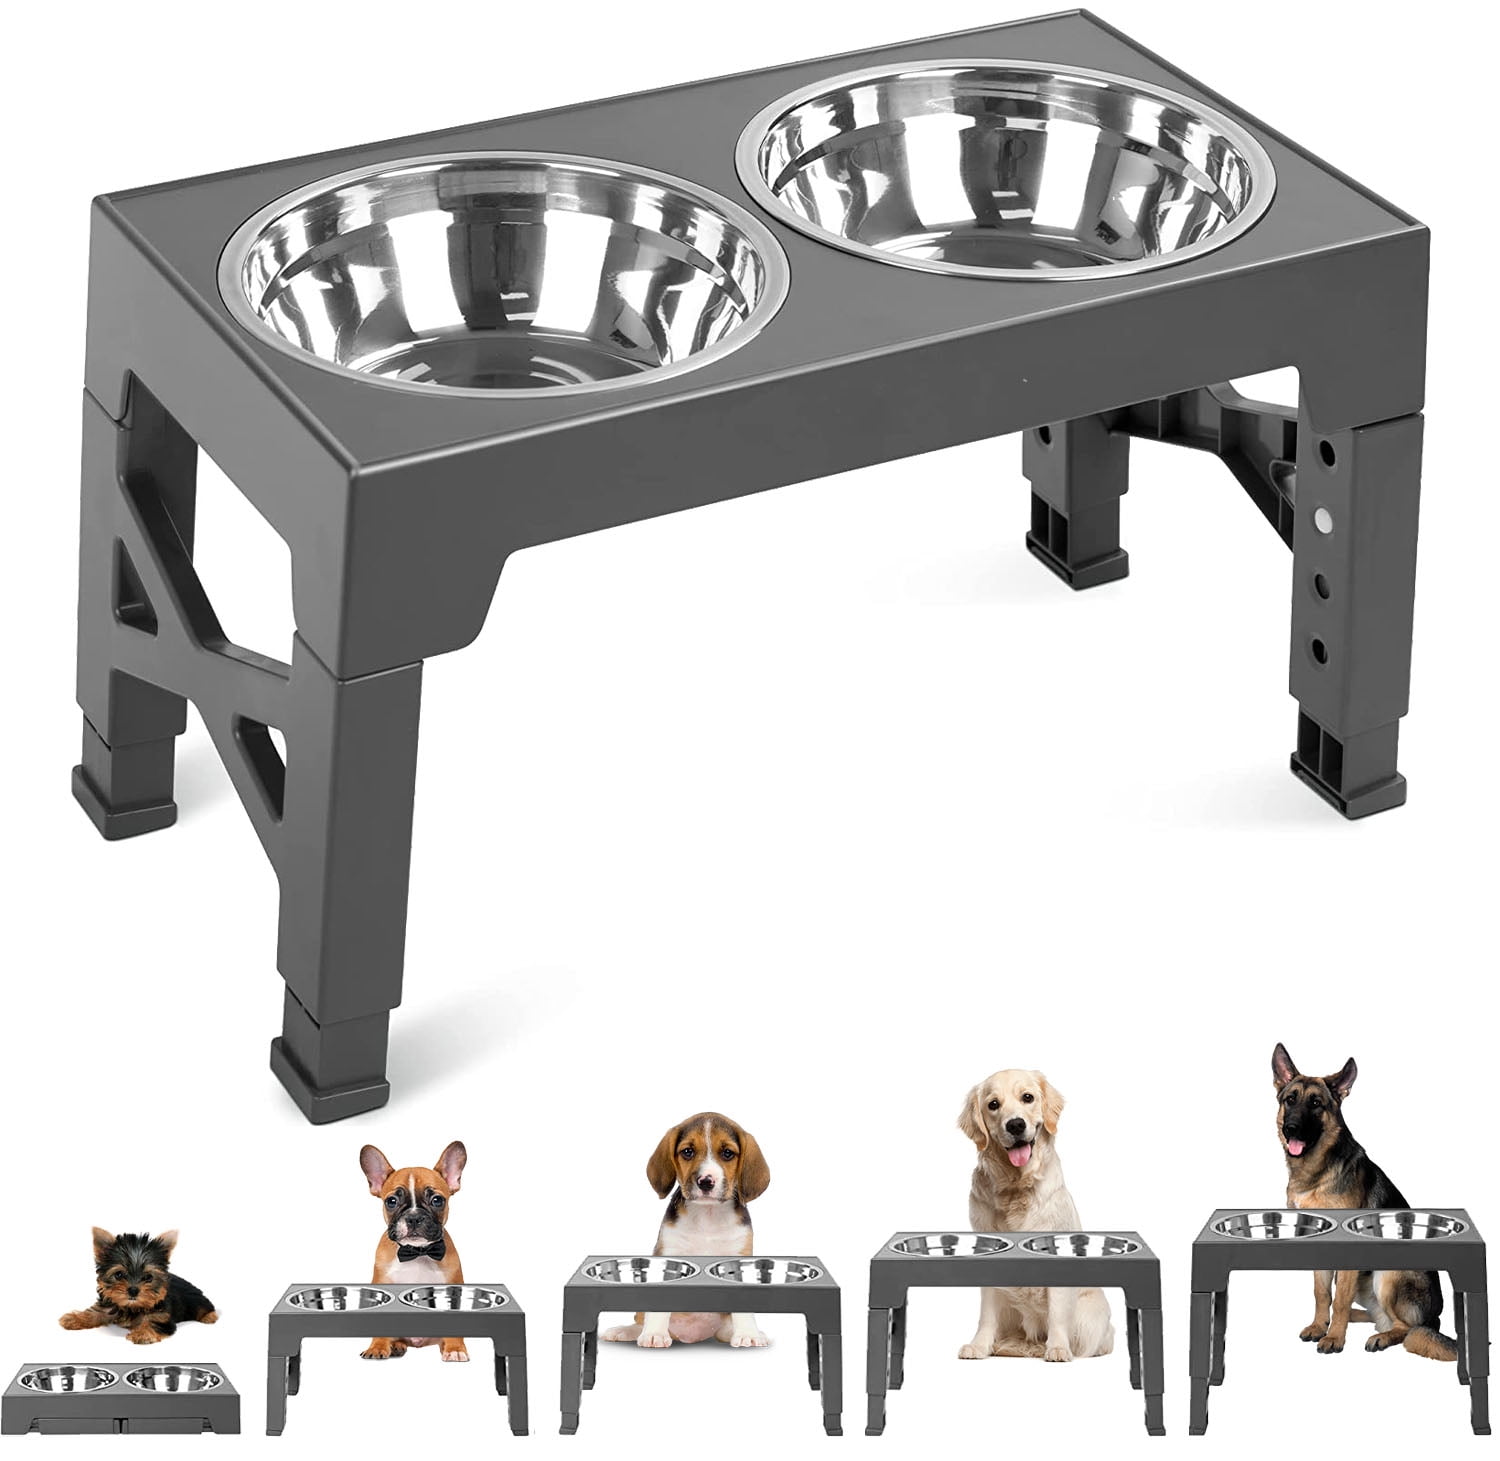 fordog Fordog Elevated Dog Bowls, Stainless Steel Raised Dog Bowls  Adjustable To 8 Heights, 275, 75, 105, 14-20, For Medium Large Sized